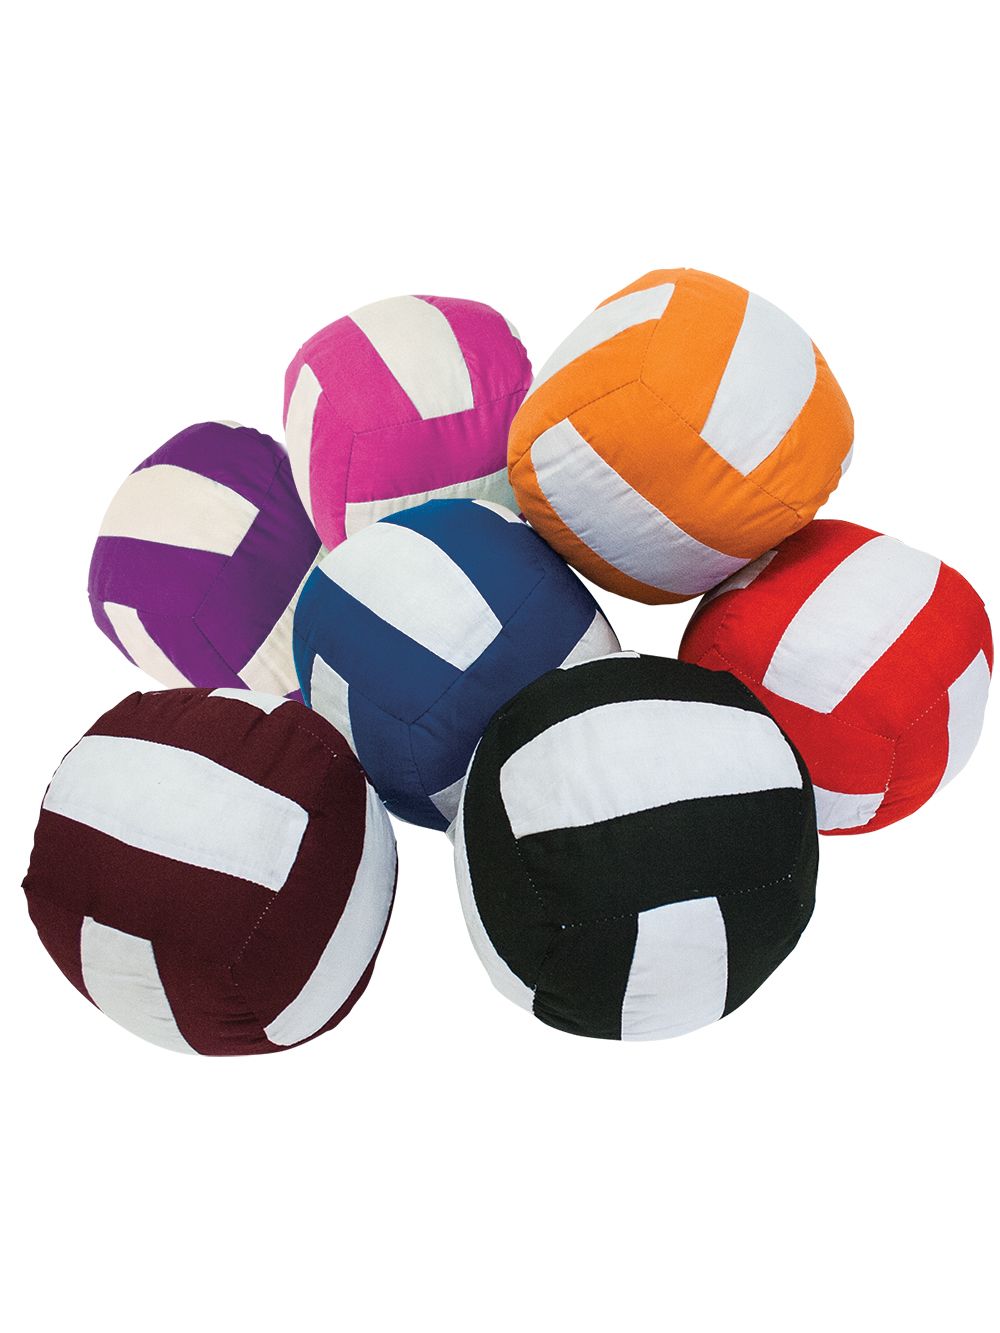 Soft Sculpture Volleyball | Midwest Volleyball Warehouse